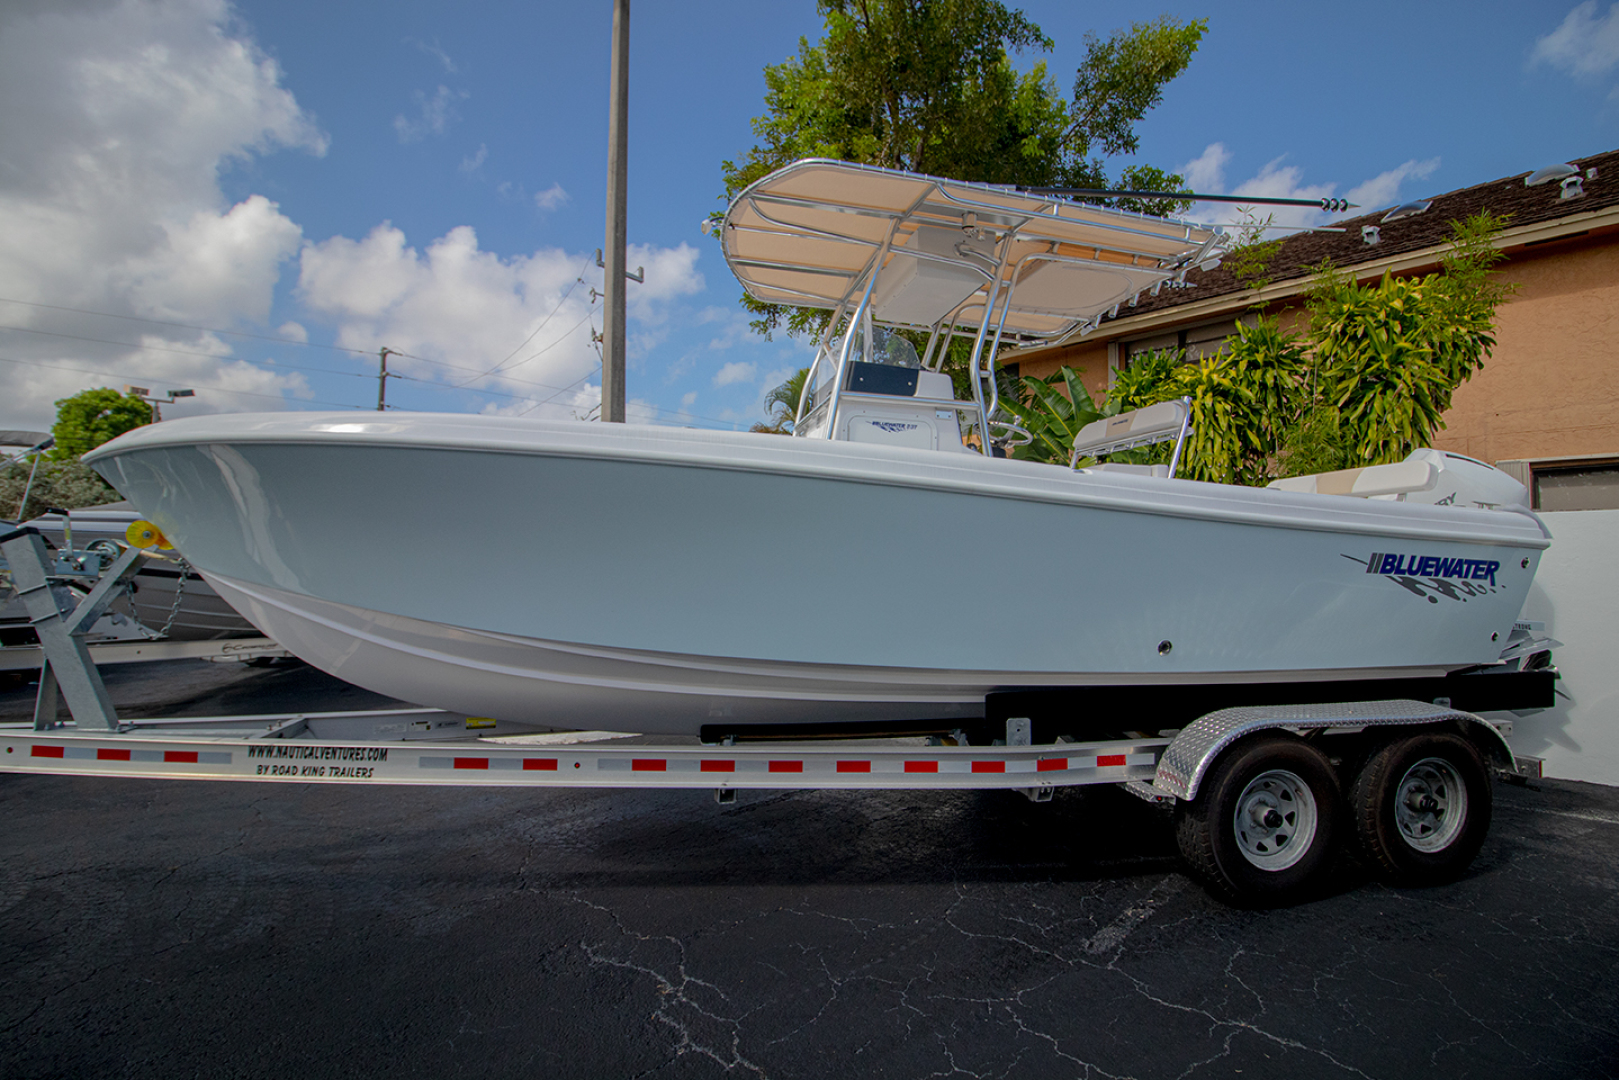 Bluewater 23t